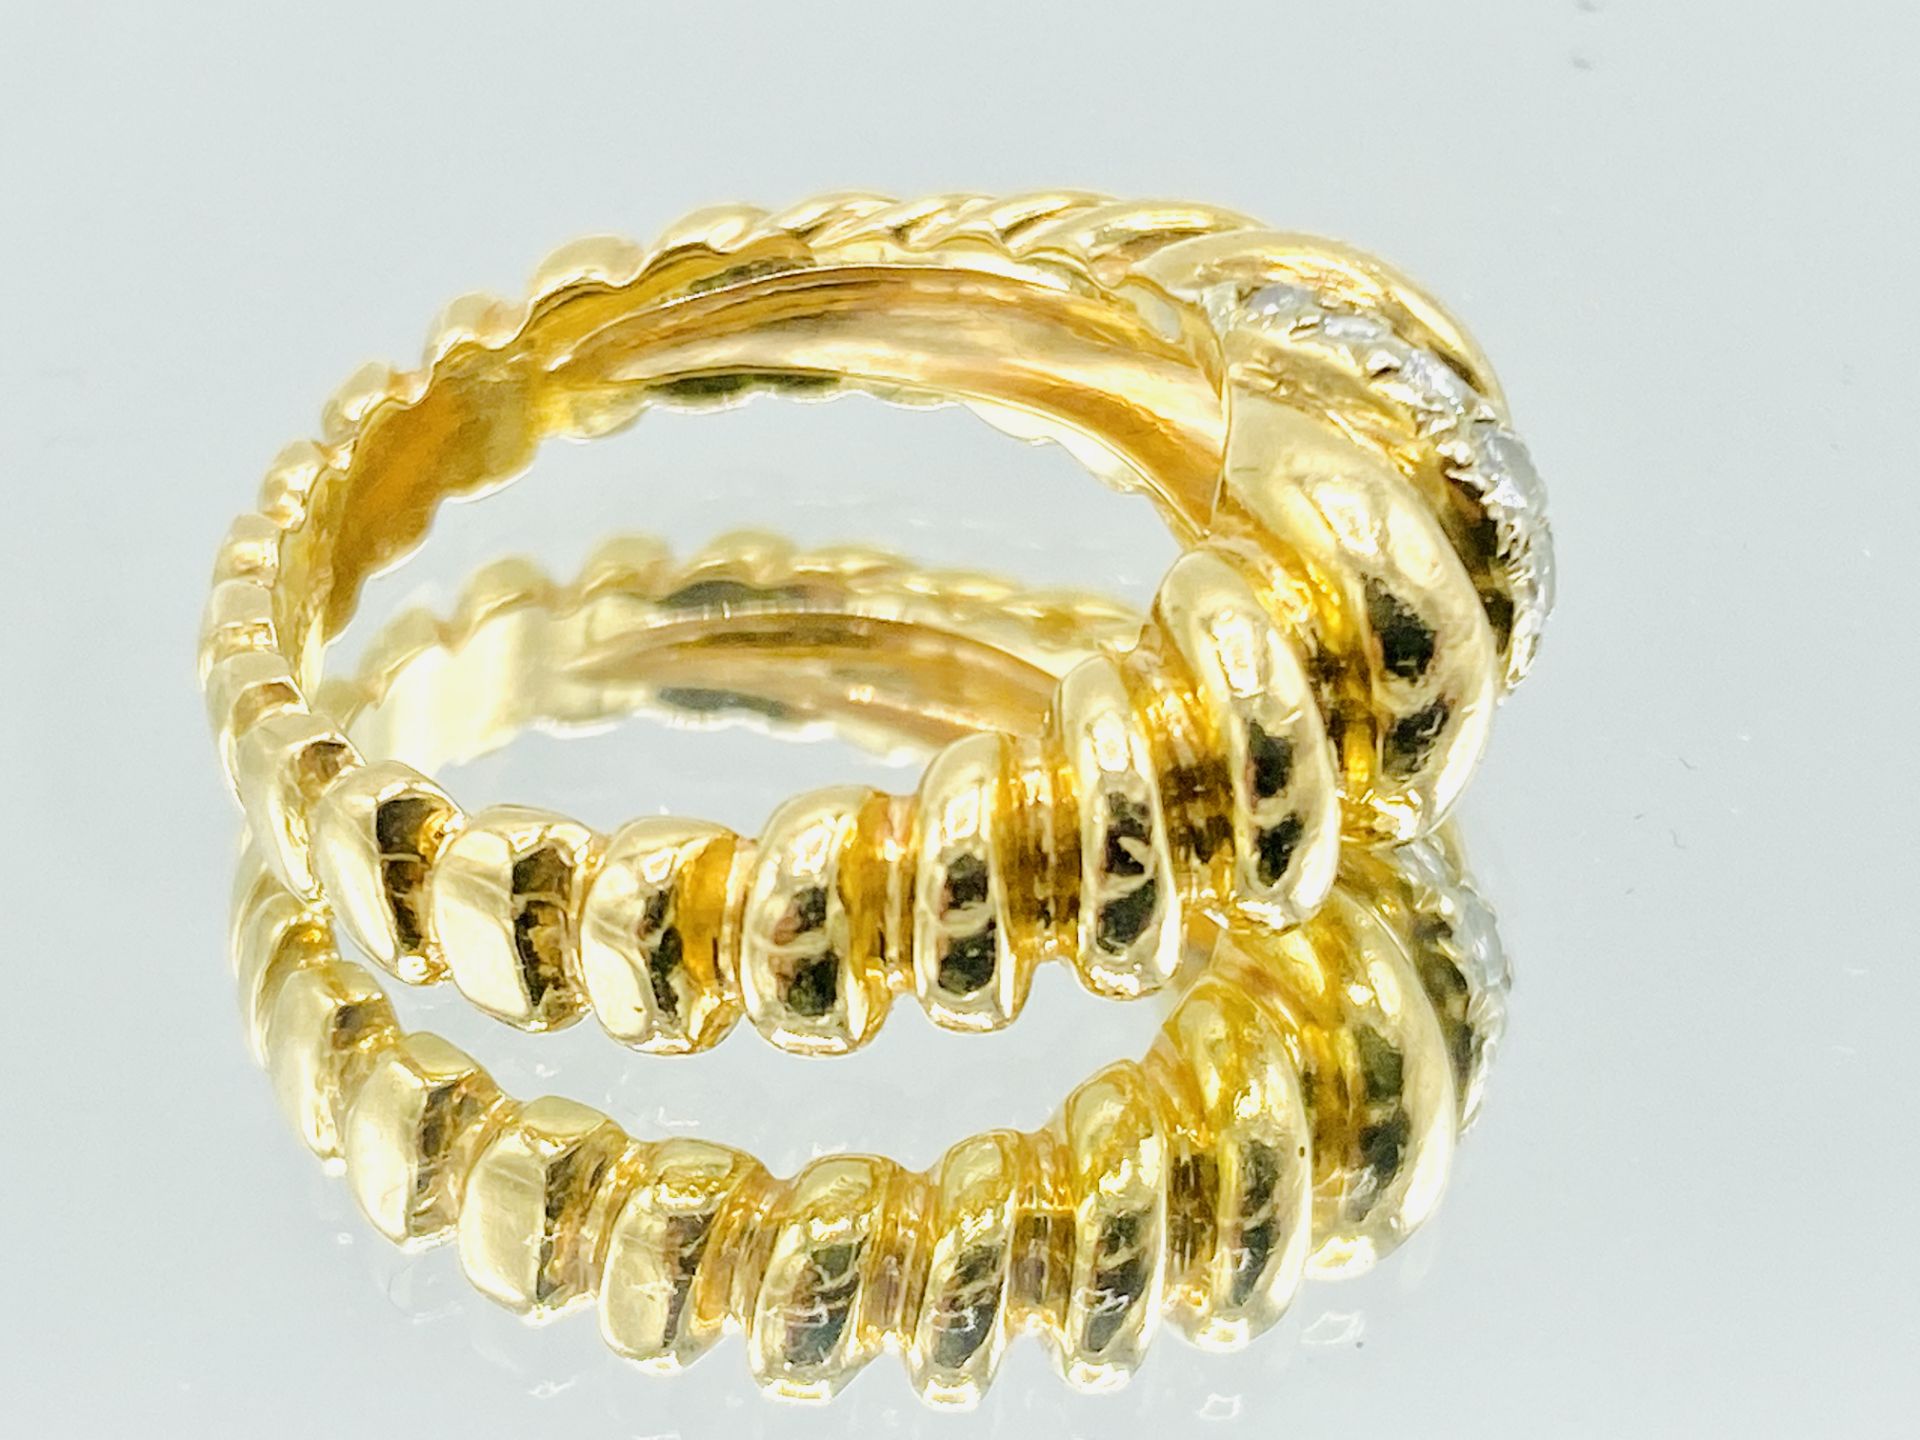 14K gold and diamond ring - Image 2 of 5